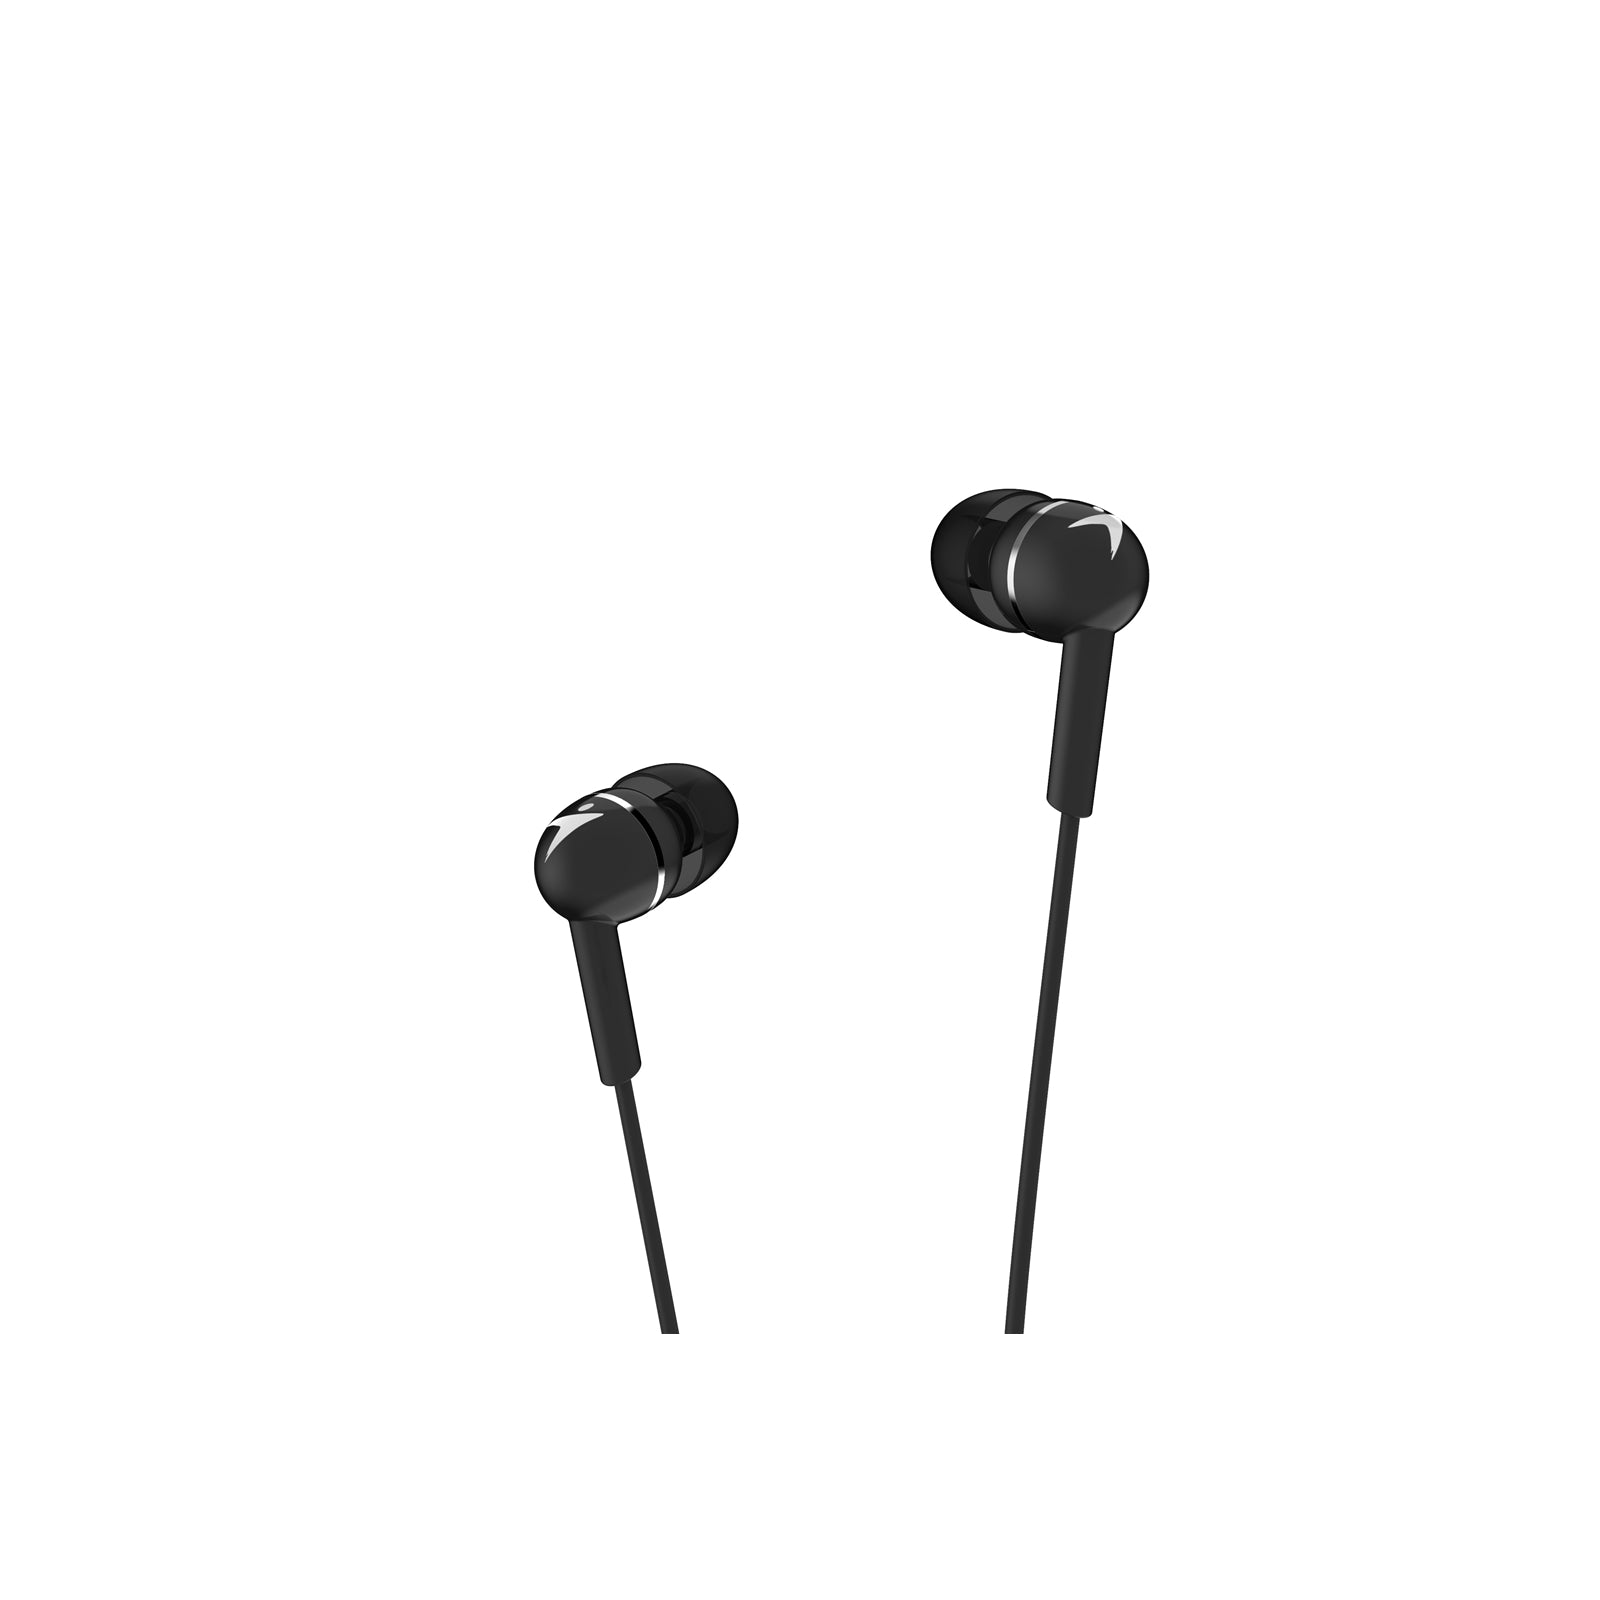 Genius HS-M300 In-Ear Headphones with Mic - High-Quality Sound